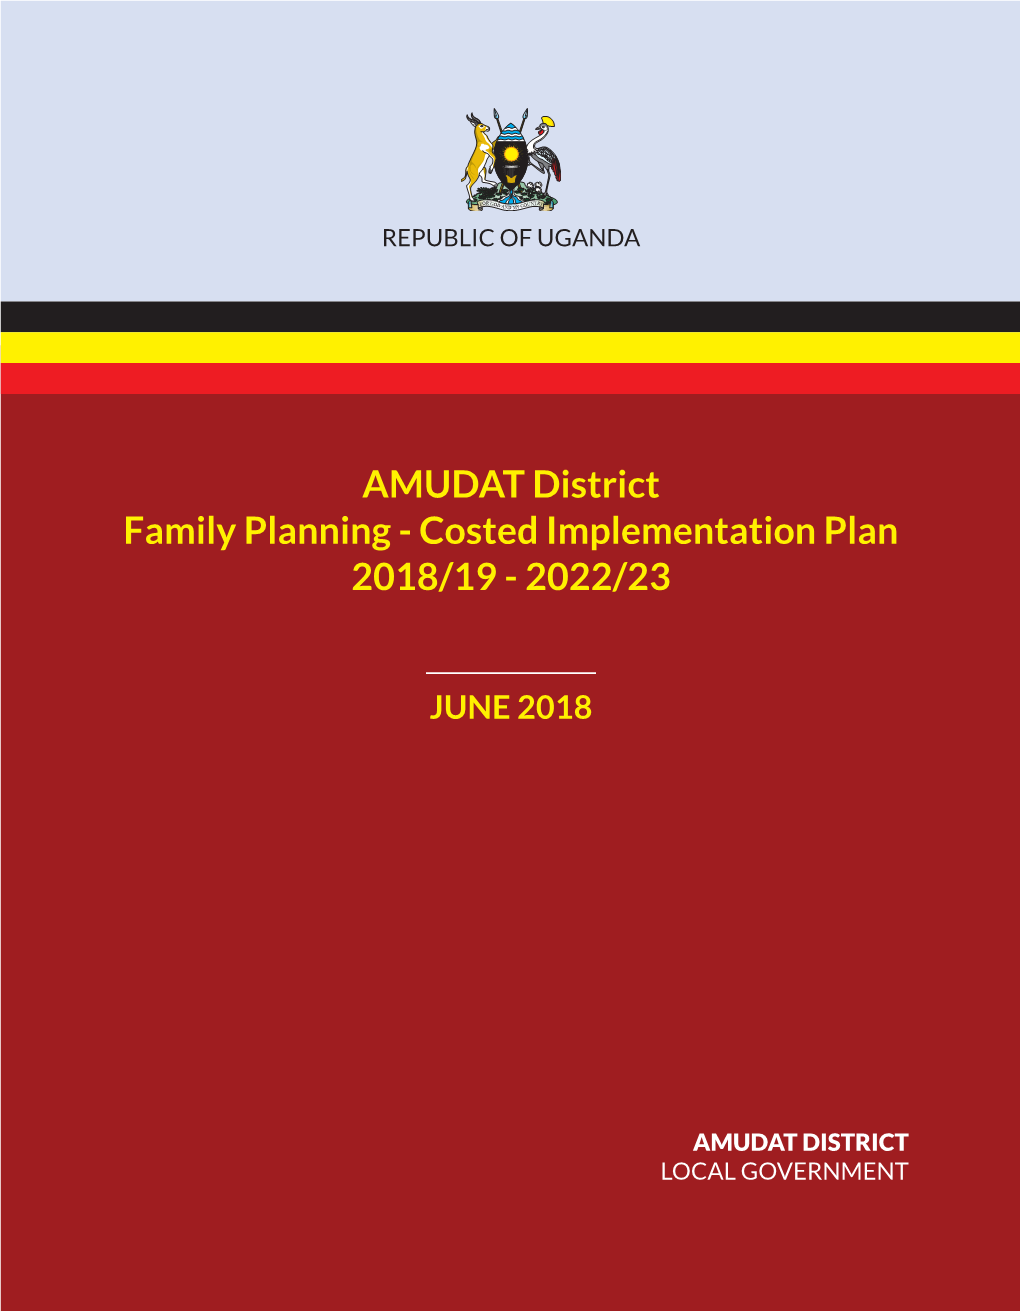 AMUDAT District Family Planning - Costed Implementation Plan 2018/19 - 2022/23